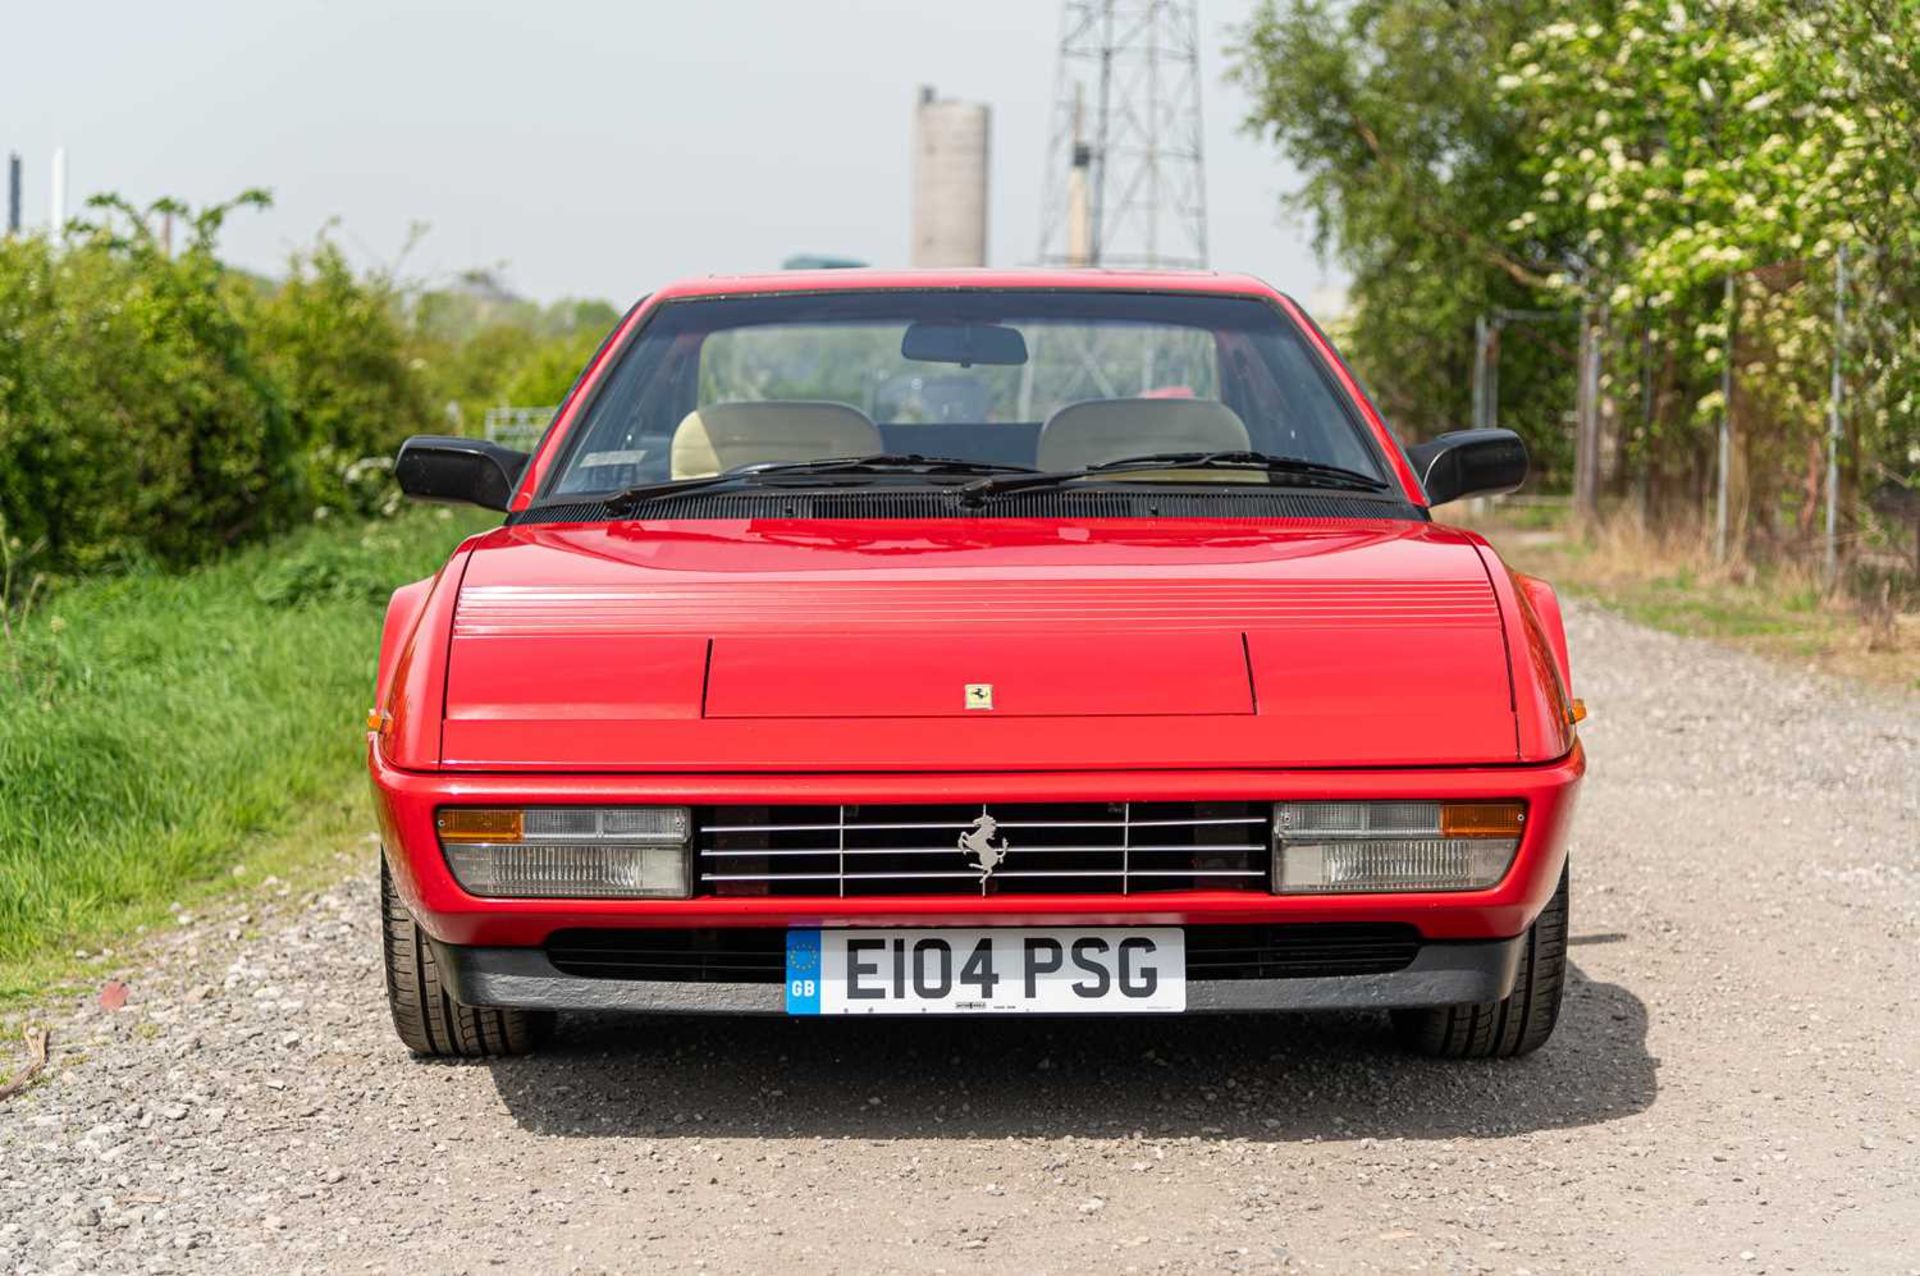 1988 Ferrari Mondial QV ***NO RESERVE*** Remained in the same ownership for nearly two decades finis - Image 2 of 91